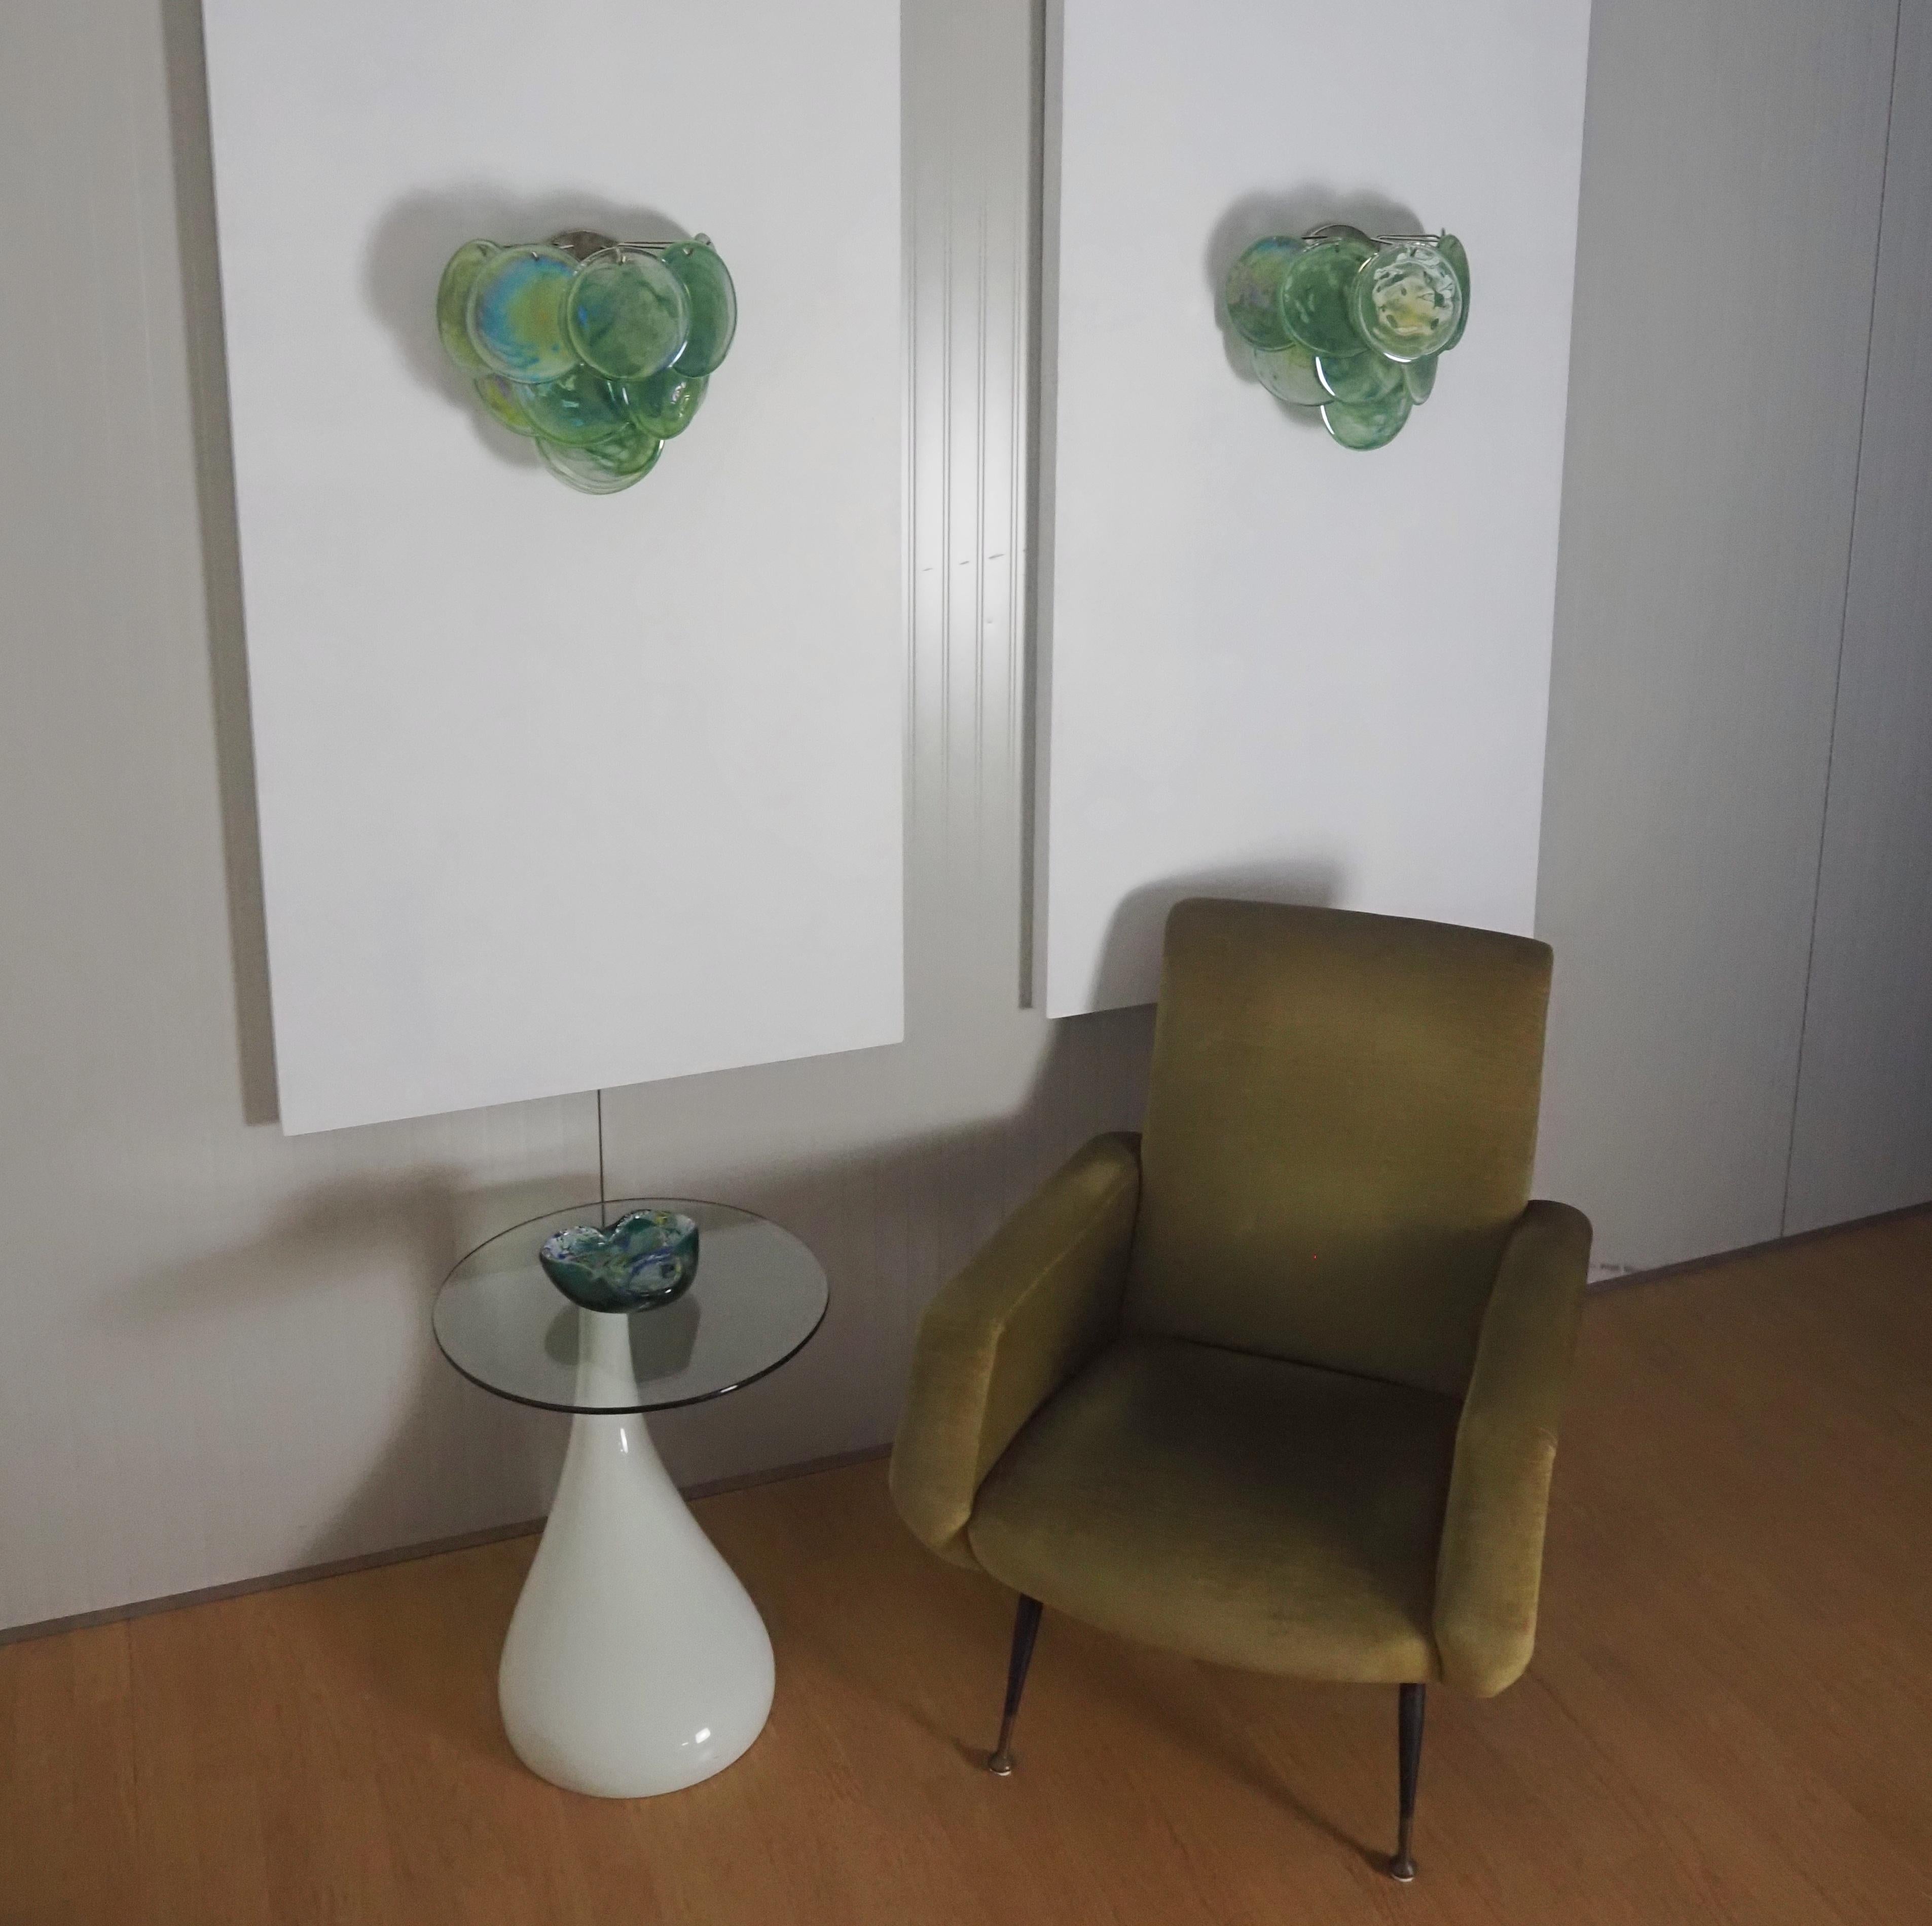 Pair of Glass Wall Sconces - 10 Iridescent Alabaster Green Discs 3